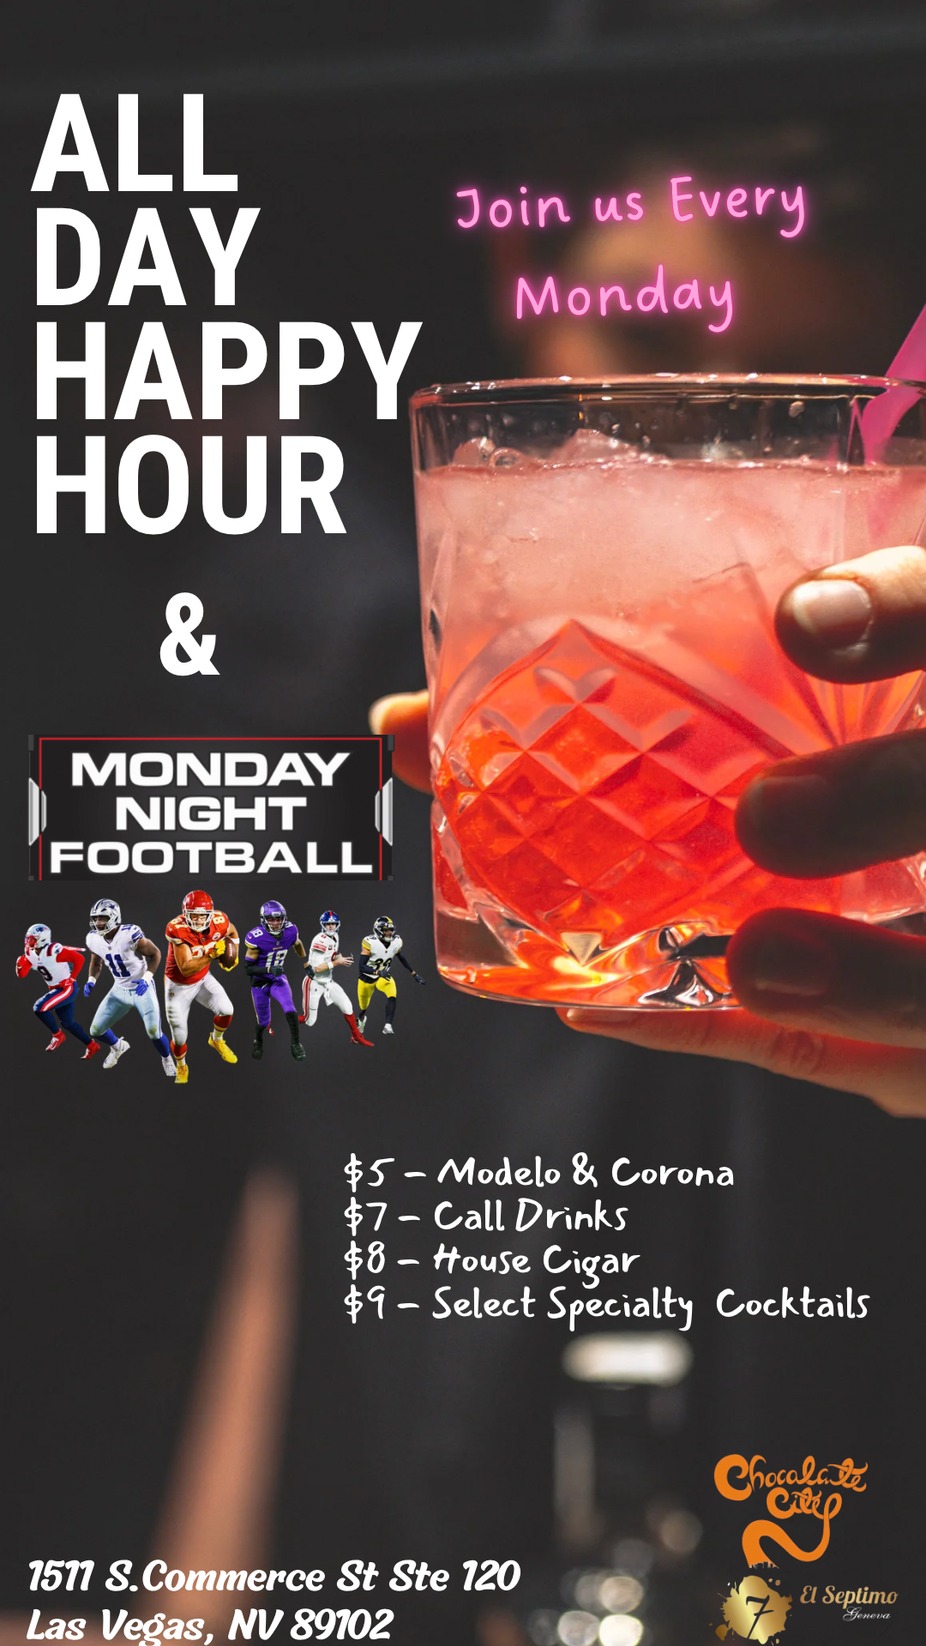 All Day Happy Hour and Monday Night Football event photo